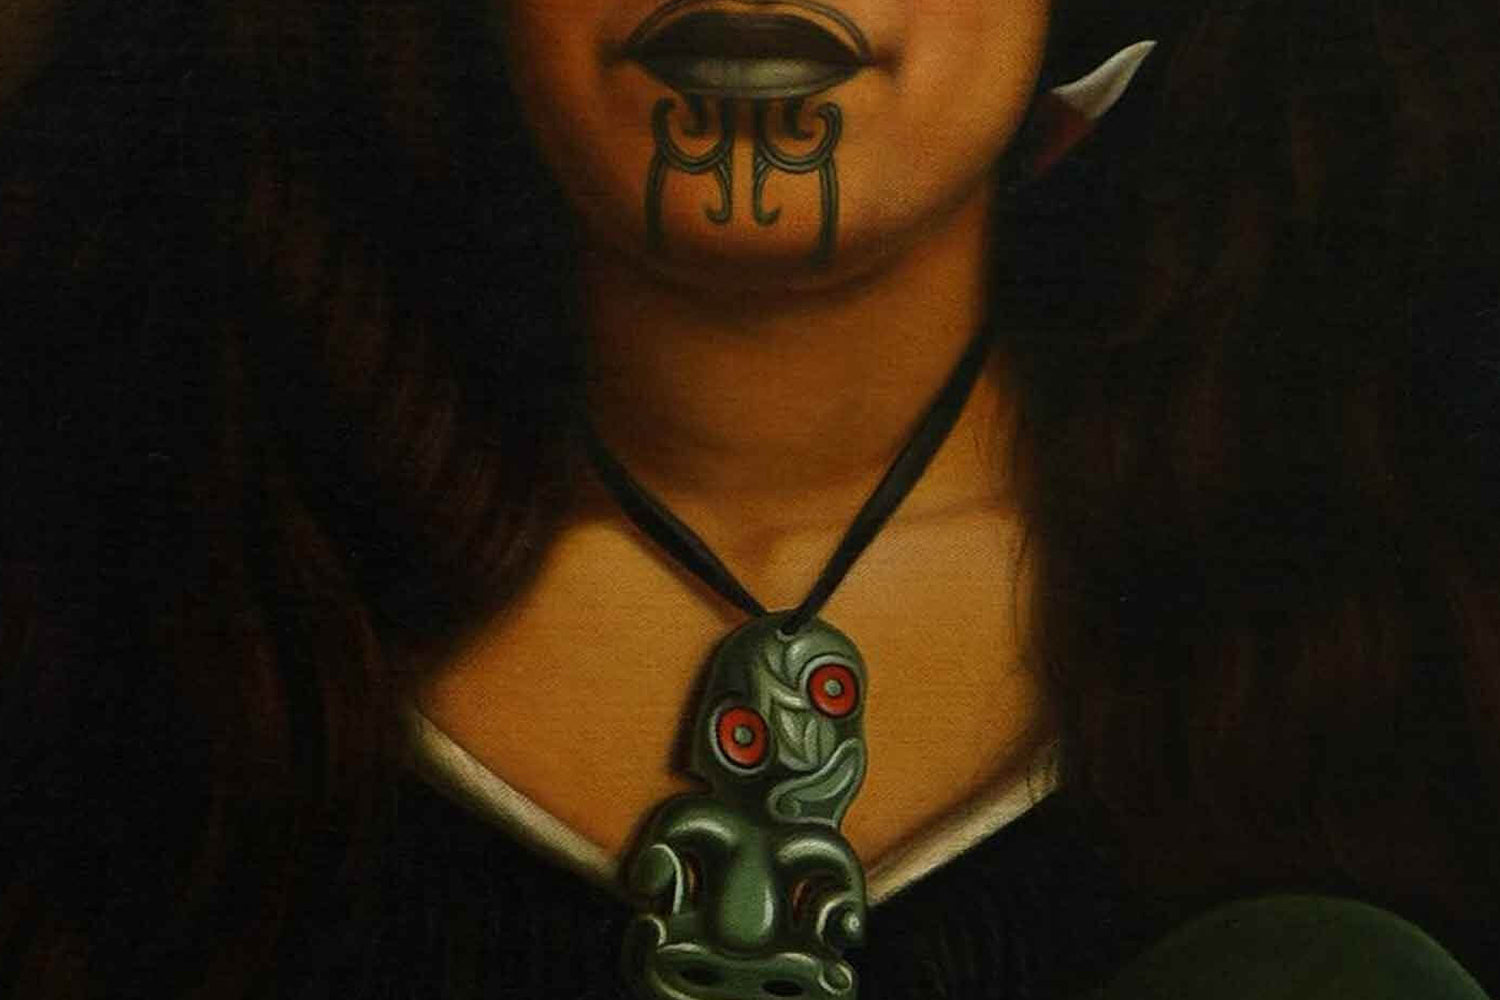 Maori necklace designs and the importance of jade to Maori culture